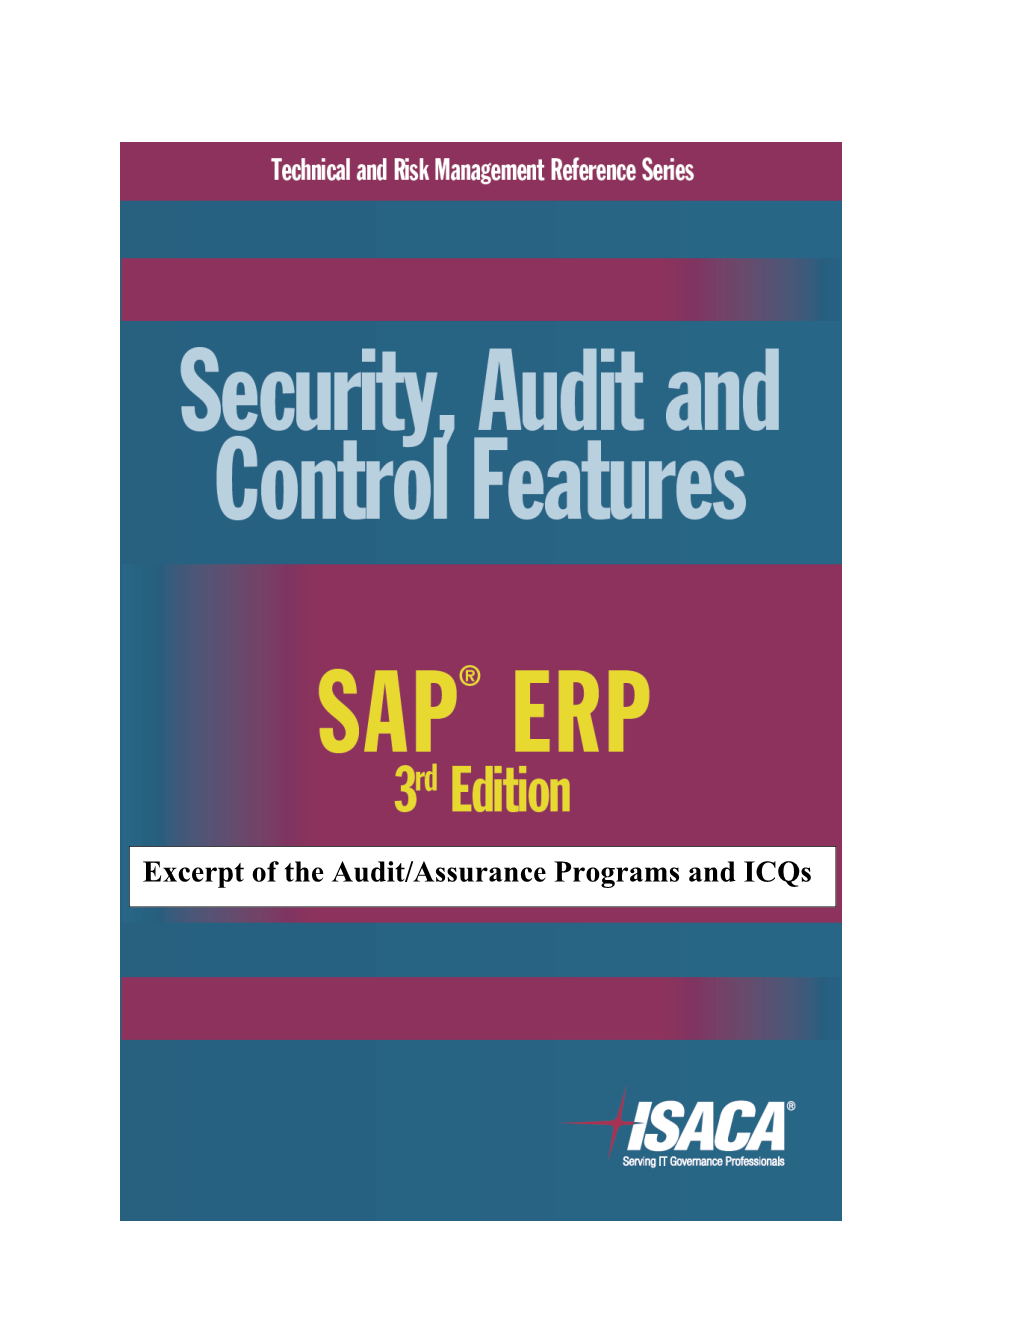 Security, Audit and Control Features SAP ERP, 3Rd Edition (Aug 2009)